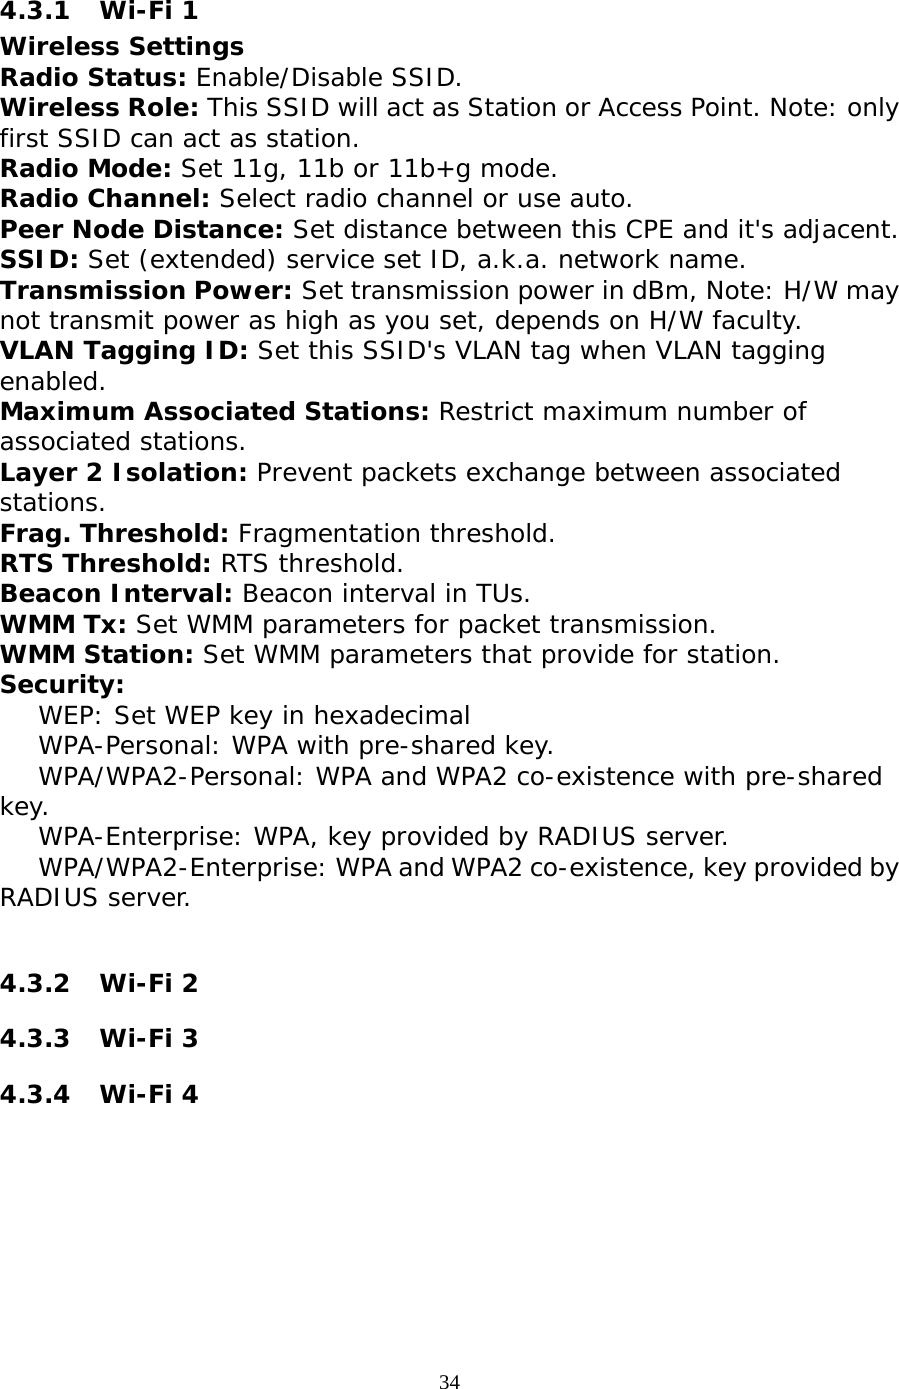                   4.3.1 Wi-Fi 1 Wireless Settings Radio Status: Enable/Disable SSID. Wireless Role: This SSID will act as Station or Access Point. Note: only first SSID can act as station.  Radio Mode: Set 11g, 11b or 11b+g mode. Radio Channel: Select radio channel or use auto. Peer Node Distance: Set distance between this CPE and it&apos;s adjacent. SSID: Set (extended) service set ID, a.k.a. network name. Transmission Power: Set transmission power in dBm, Note: H/W may not transmit power as high as you set, depends on H/W faculty. VLAN Tagging ID: Set this SSID&apos;s VLAN tag when VLAN tagging enabled. Maximum Associated Stations: Restrict maximum number of associated stations. Layer 2 Isolation: Prevent packets exchange between associated stations. Frag. Threshold: Fragmentation threshold. RTS Threshold: RTS threshold. Beacon Interval: Beacon interval in TUs. WMM Tx: Set WMM parameters for packet transmission. WMM Station: Set WMM parameters that provide for station. Security:      WEP: Set WEP key in hexadecimal     WPA-Personal: WPA with pre-shared key.     WPA/WPA2-Personal: WPA and WPA2 co-existence with pre-shared key.     WPA-Enterprise: WPA, key provided by RADIUS server.     WPA/WPA2-Enterprise: WPA and WPA2 co-existence, key provided by RADIUS server.  4.3.2 Wi-Fi 2 4.3.3 Wi-Fi 3 4.3.4 Wi-Fi 4  34 